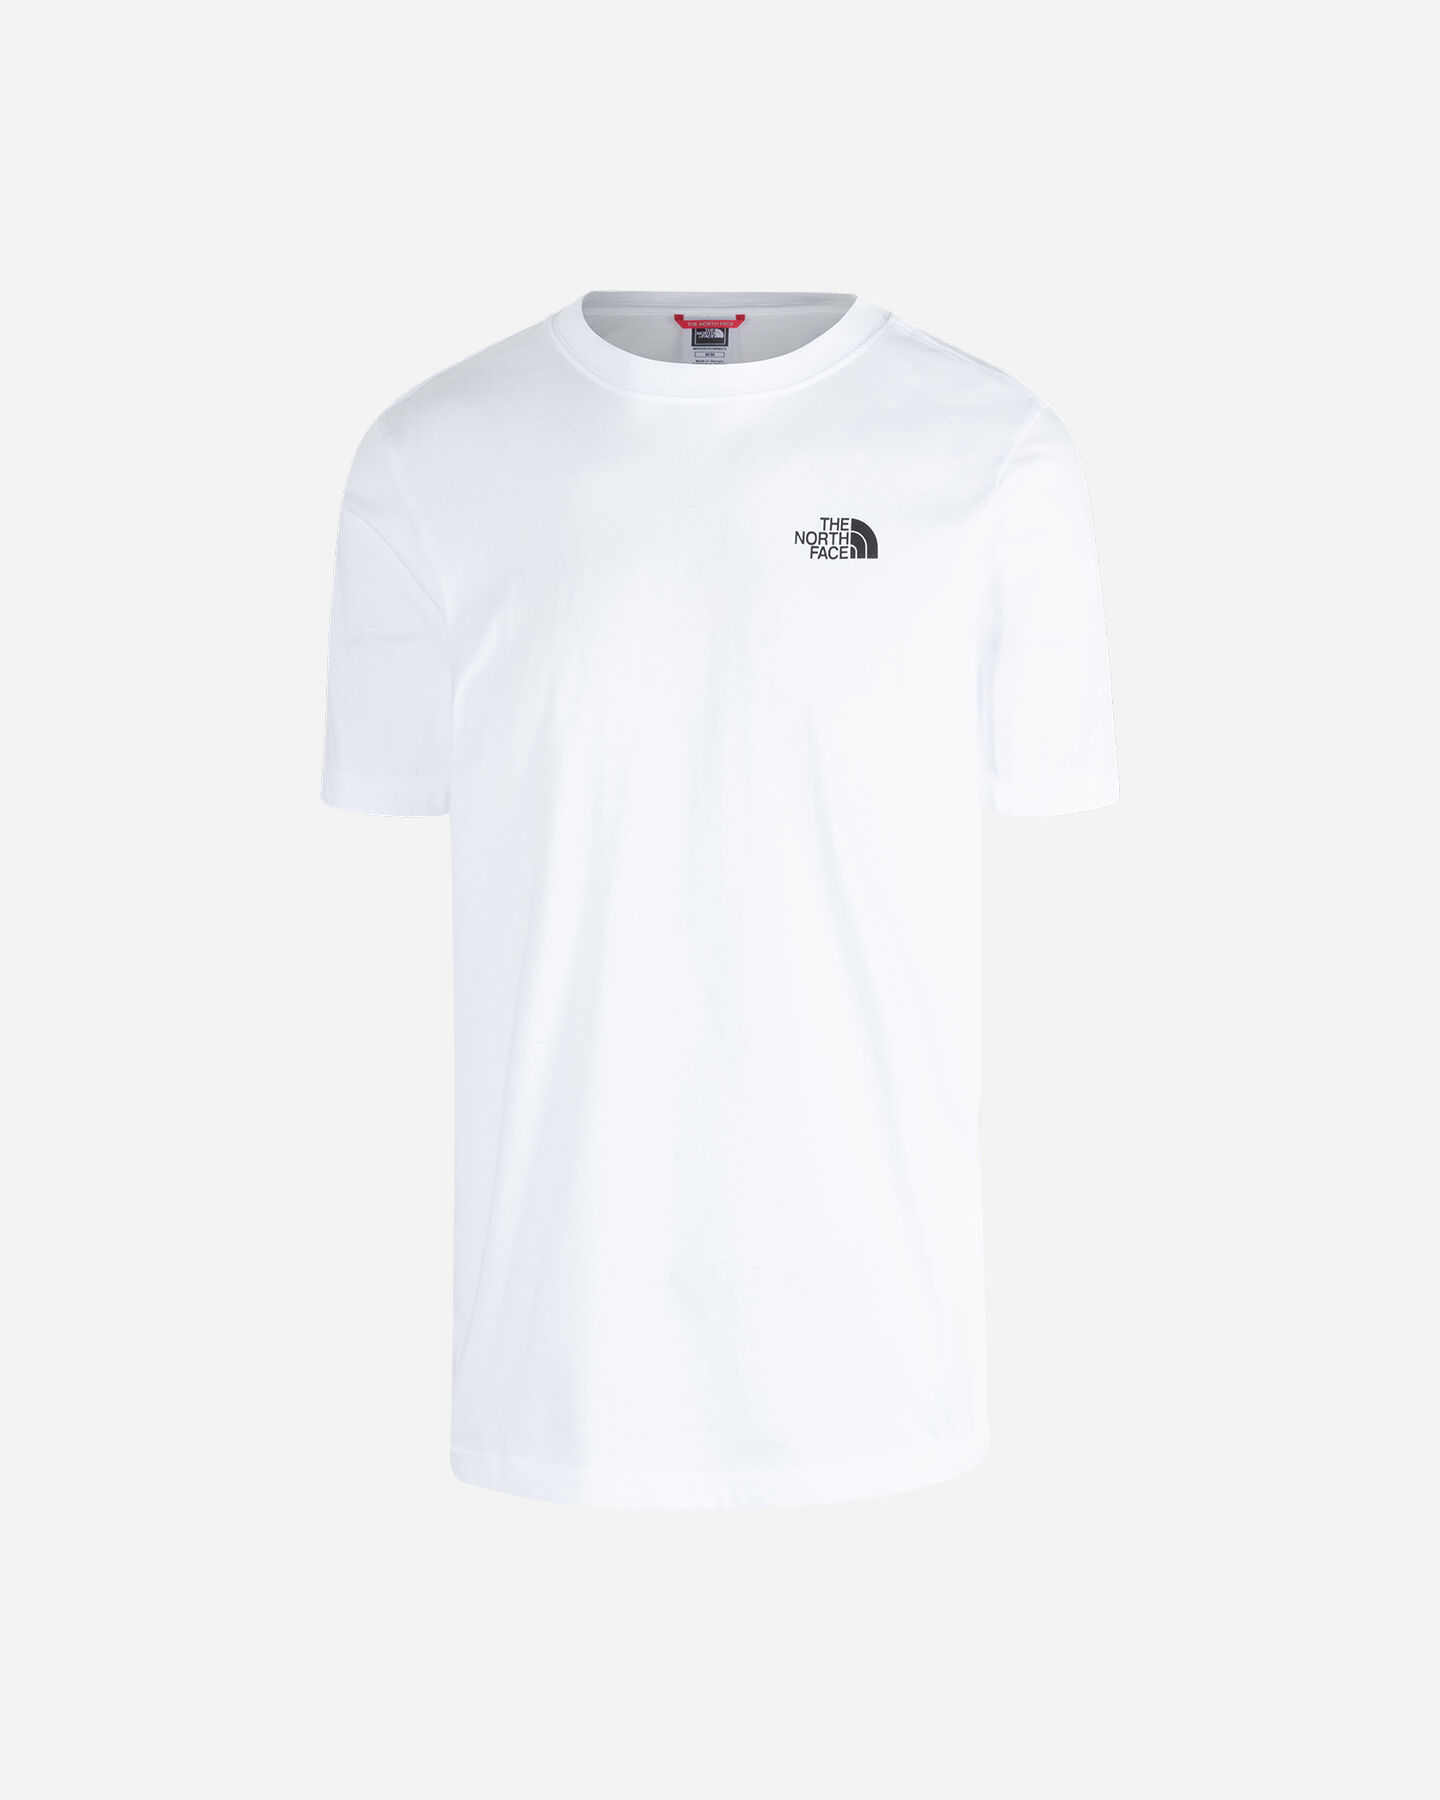  T-Shirt THE NORTH FACE NEW ODLES M S5537256 scatto 0